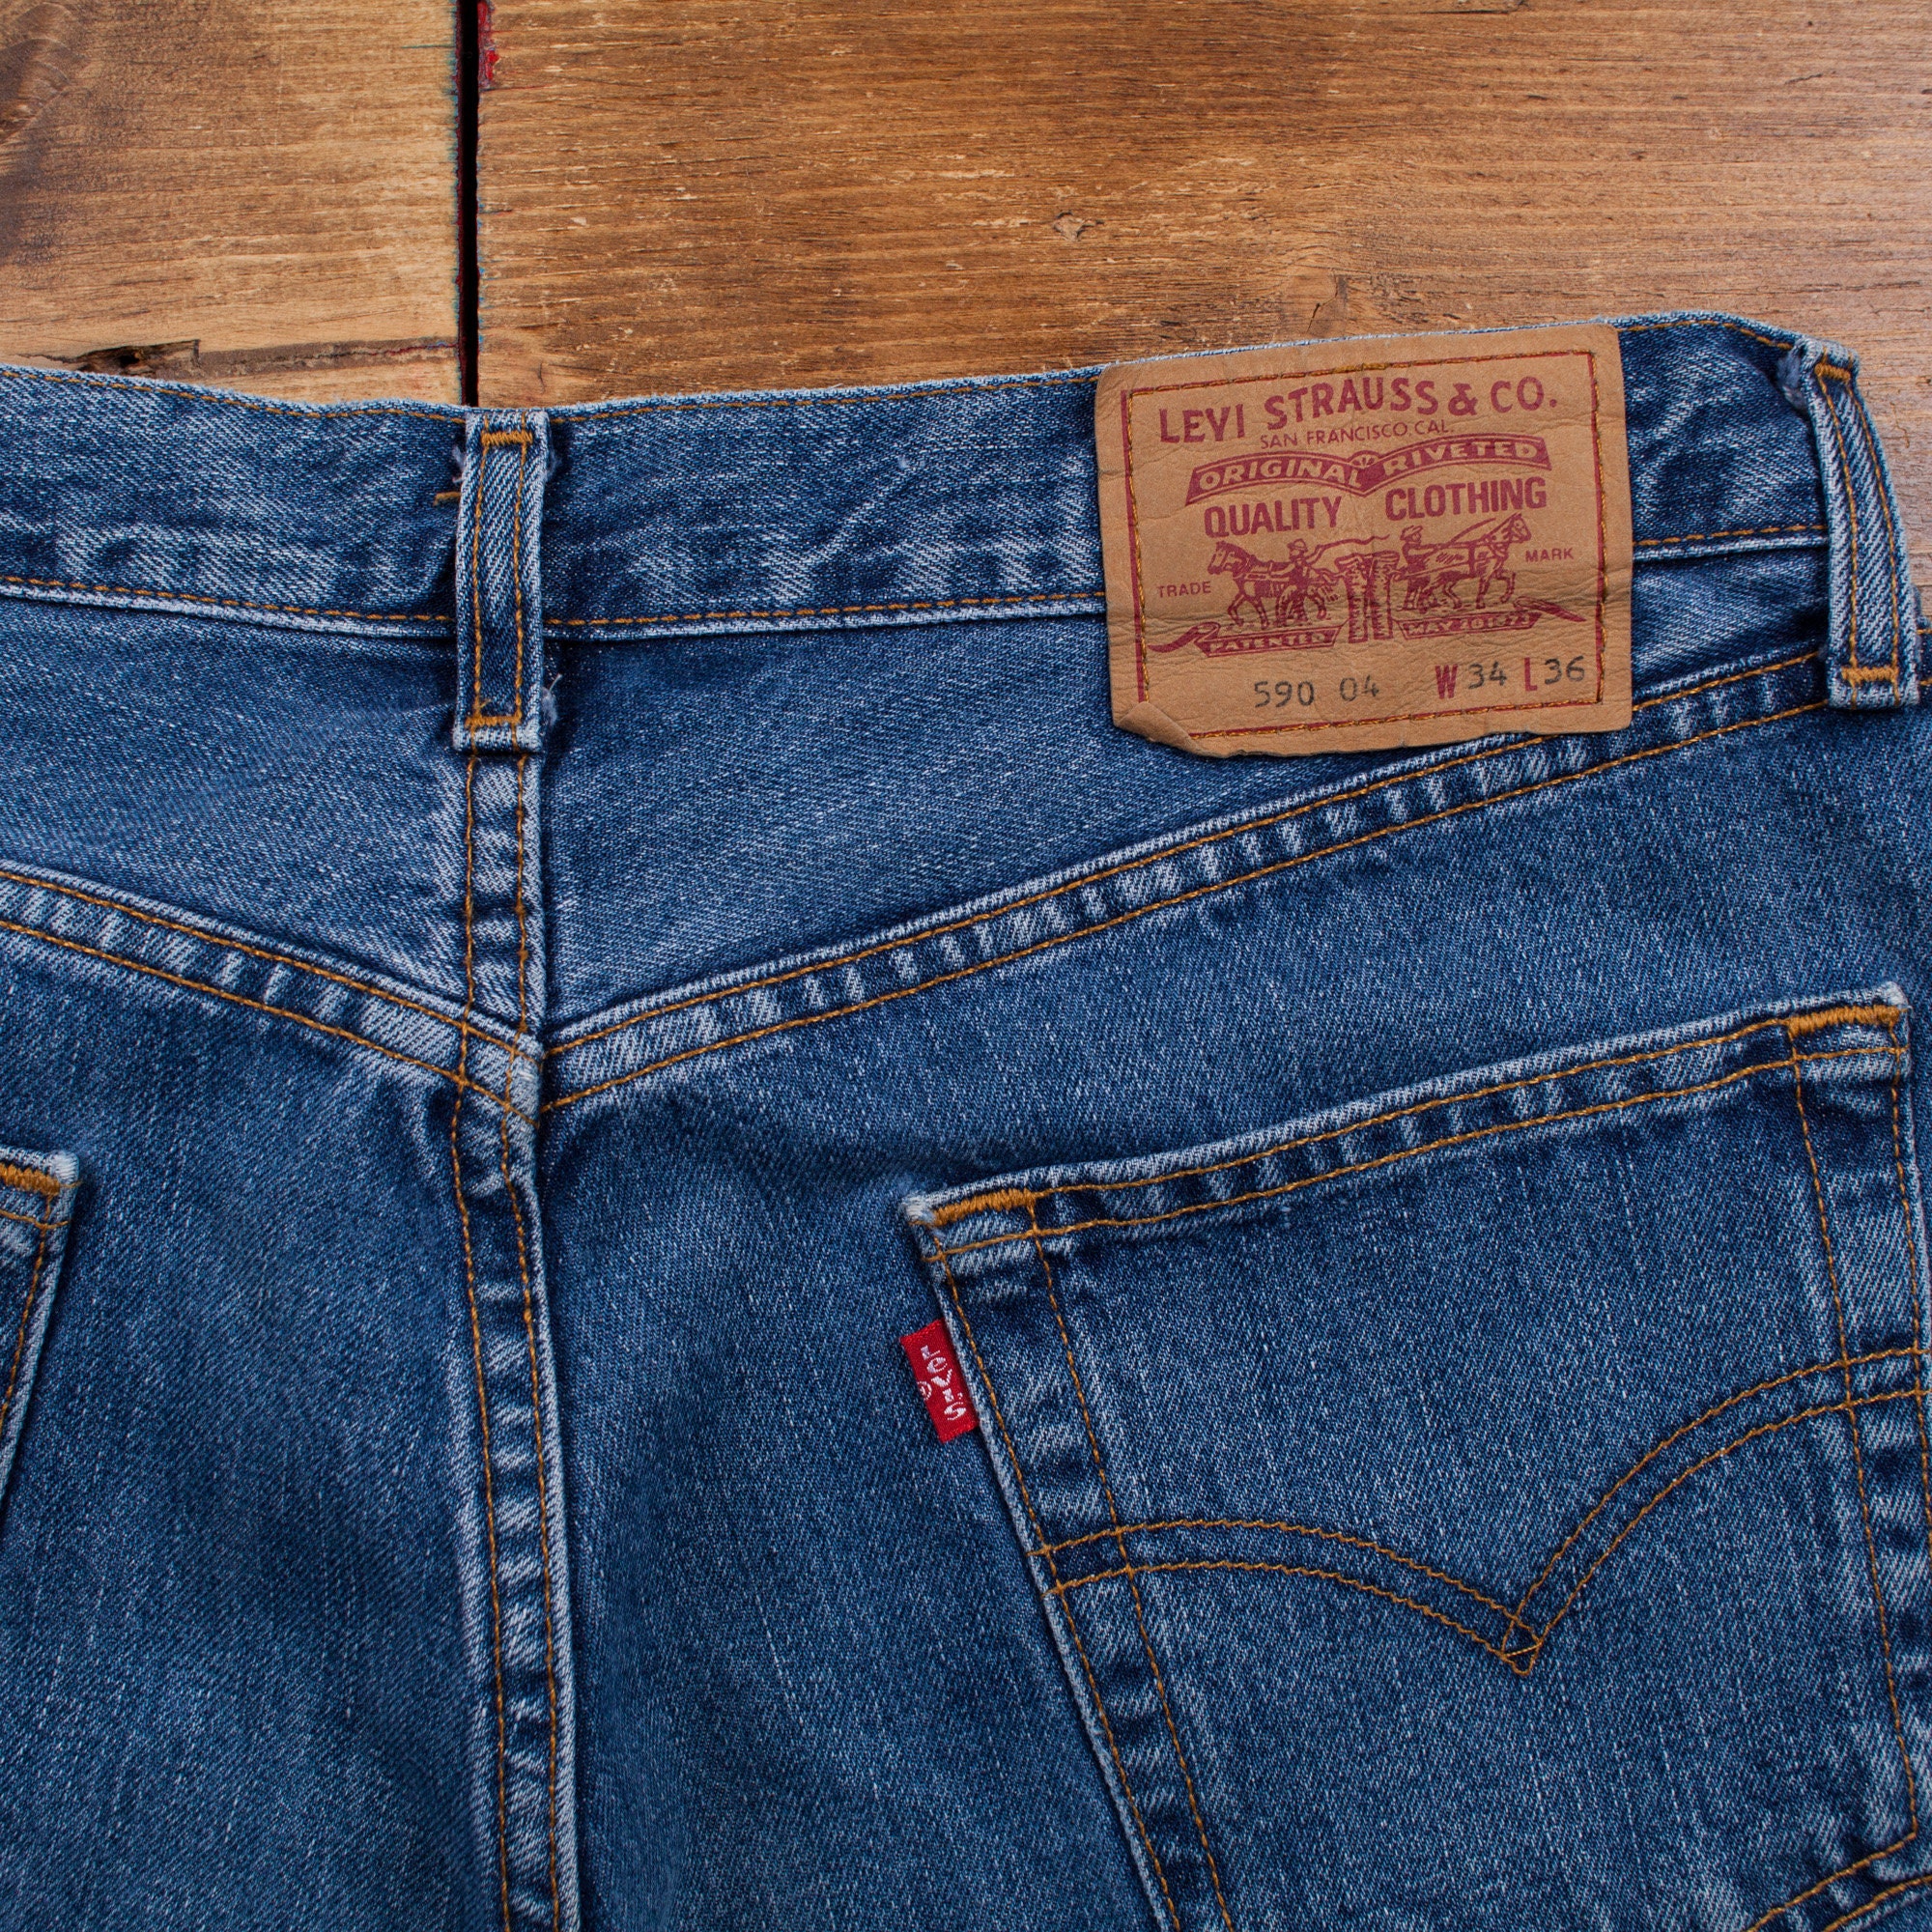 Vintage Levis 590 Jeans 34 X 33 Straight Leg Red Tab Faded Mid - Etsy  Denmark